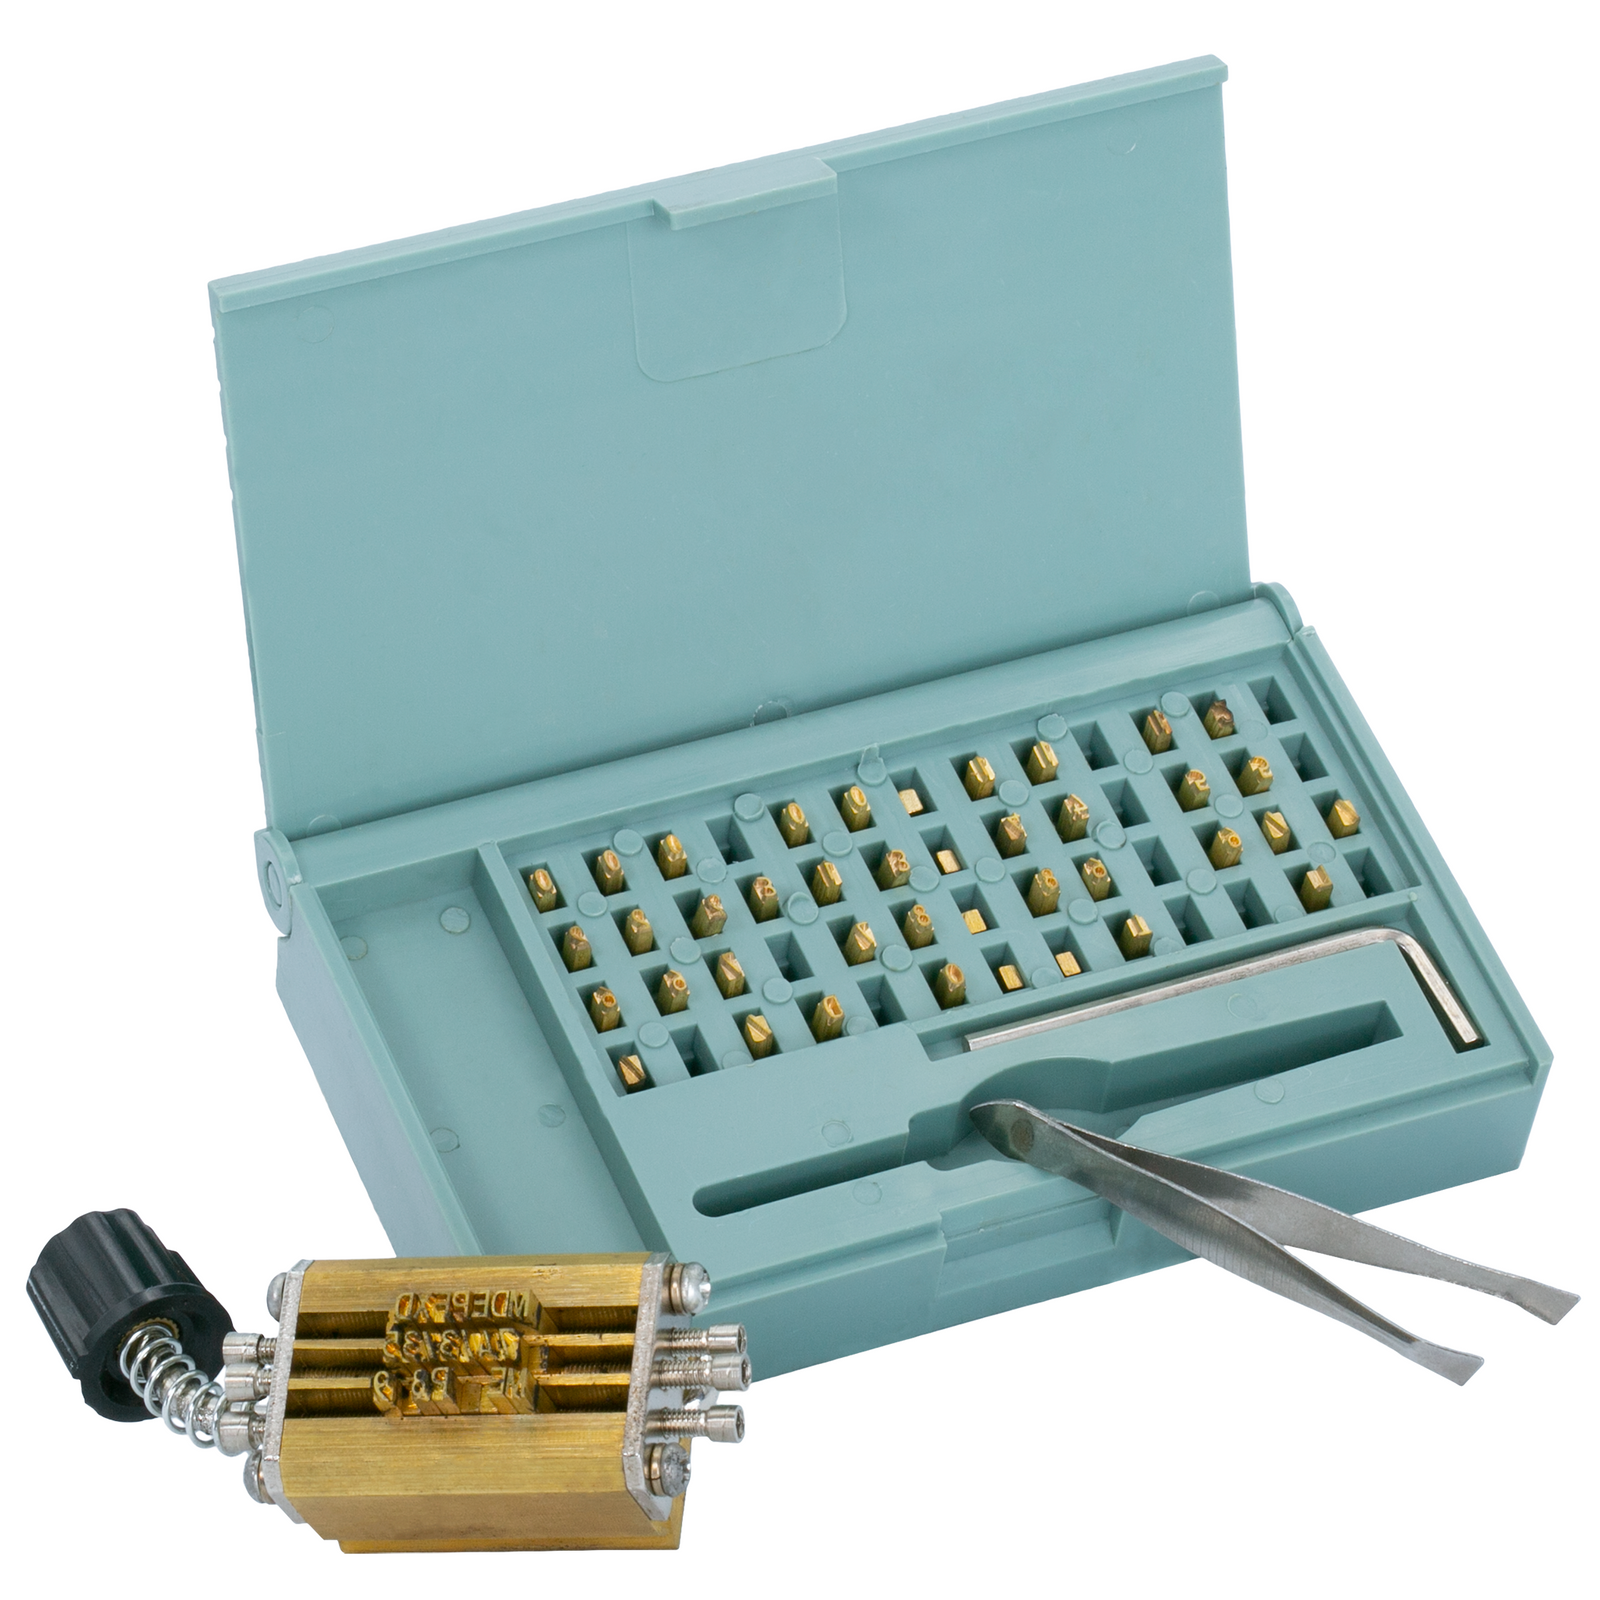 Complete set of types, installation tools and a type holder compatible with the DAX P100 manual hot foil stamping printer